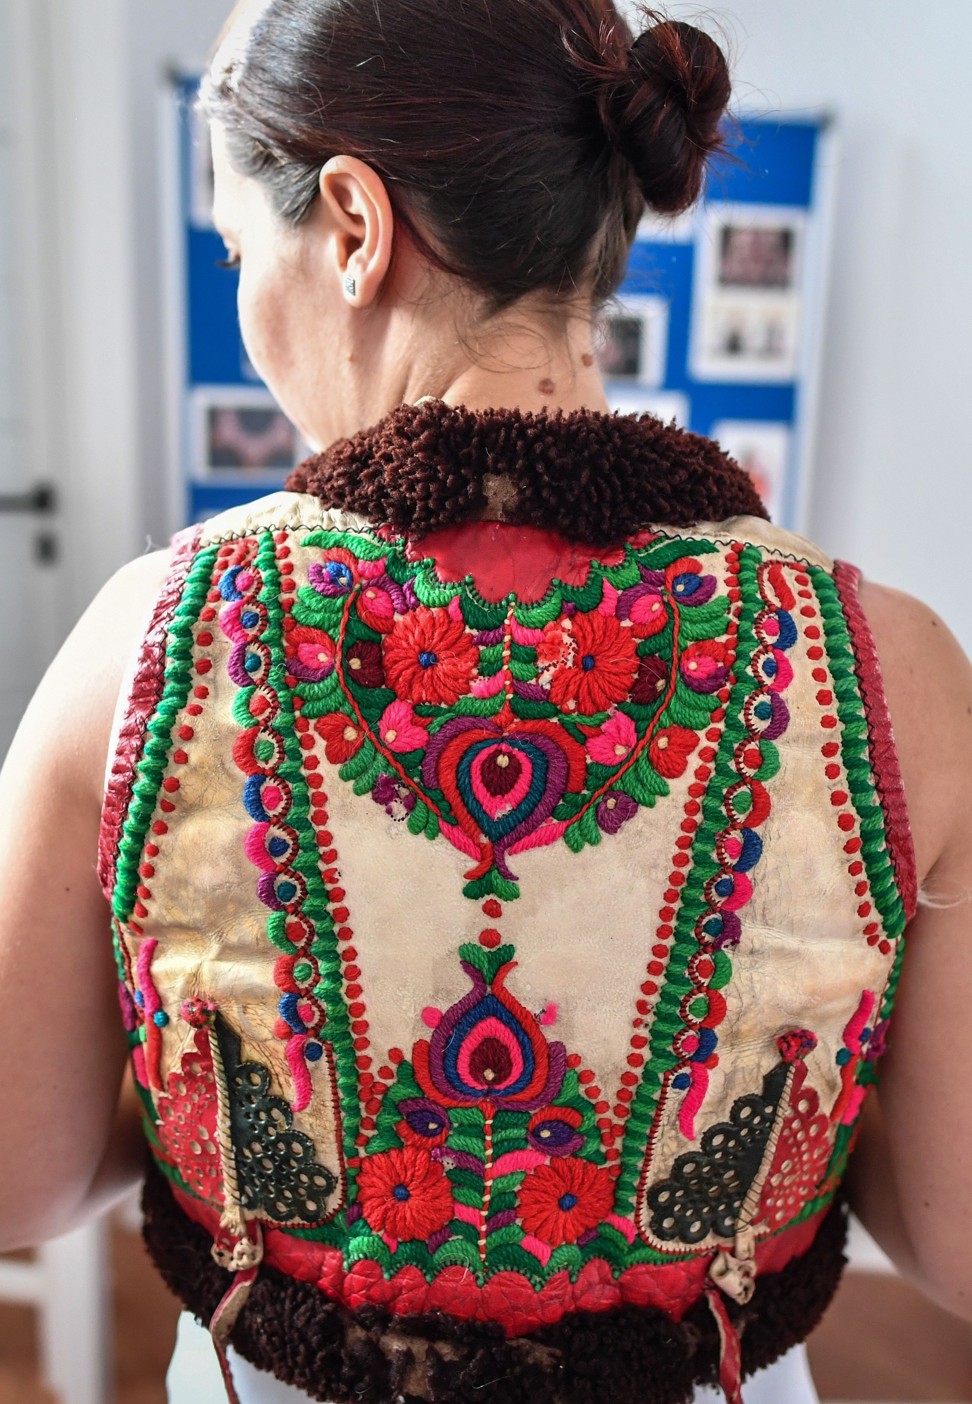 Clothes makers were shocked when they saw an embroidered folk coat which looked strikingly similar to the ‘cojocel binsenesc’ waistcoat their region has been producing for around a century.